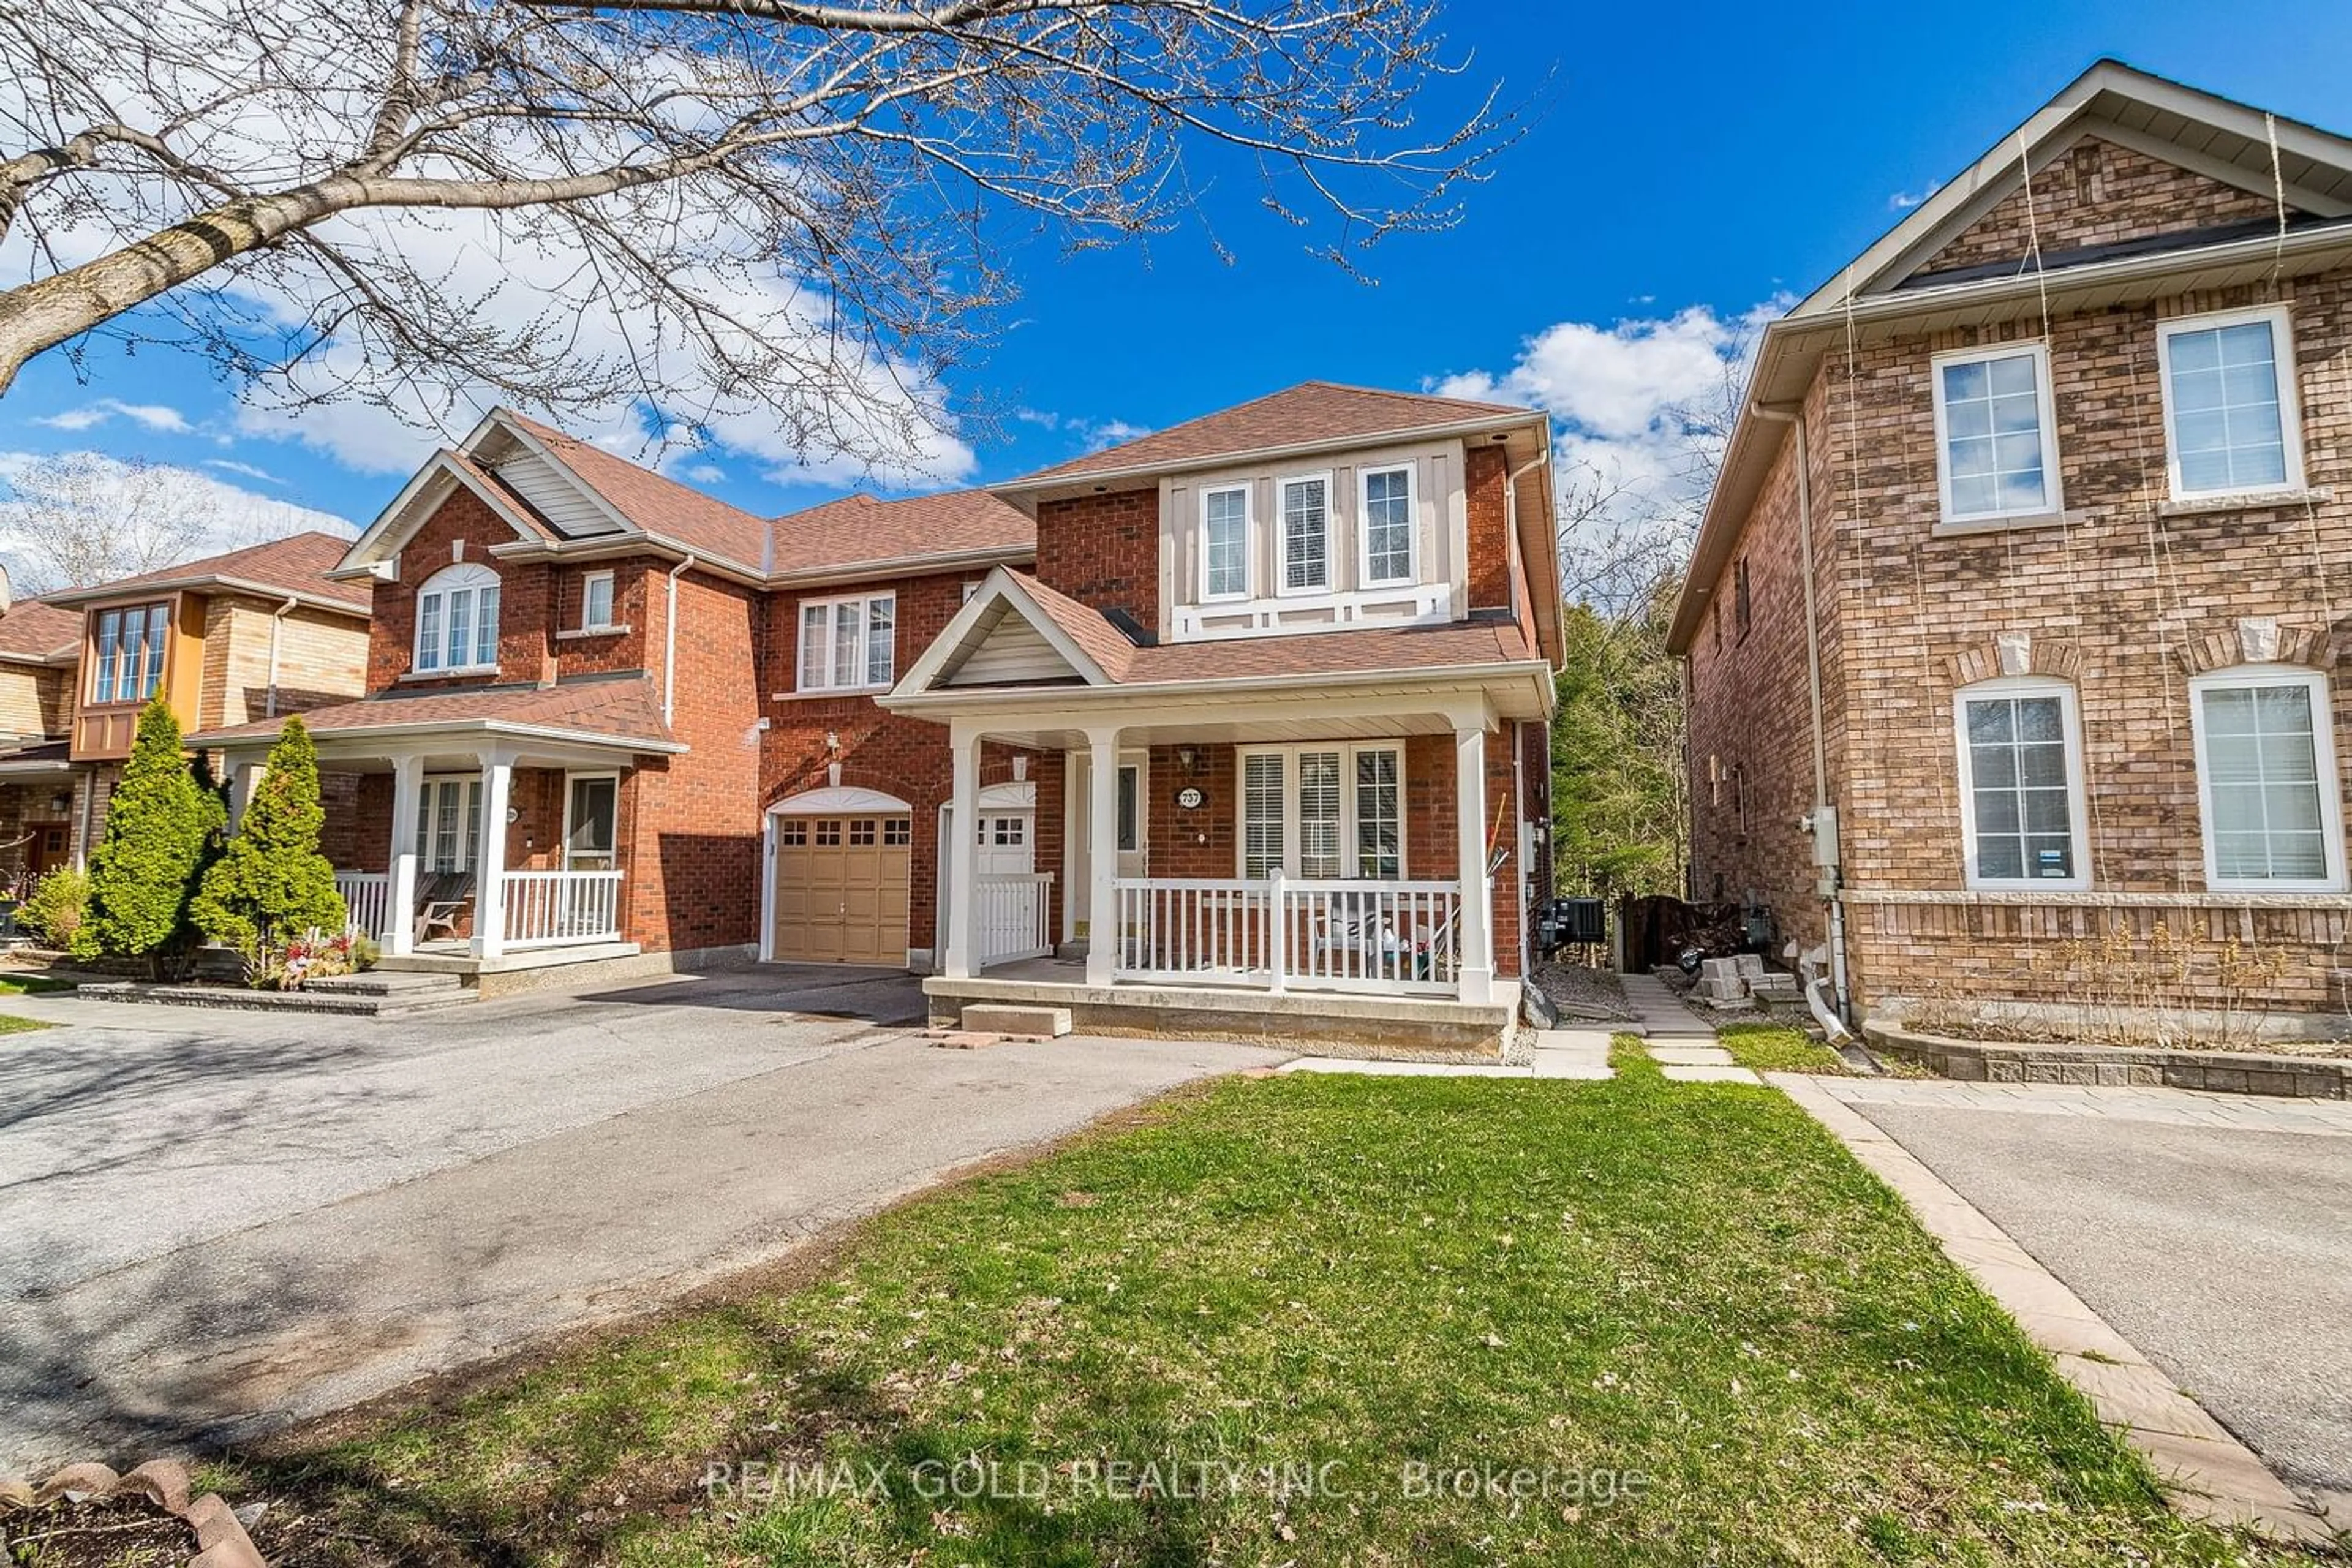 Home with brick exterior material for 737 Craighurst Crt, Pickering Ontario L1X 2X1